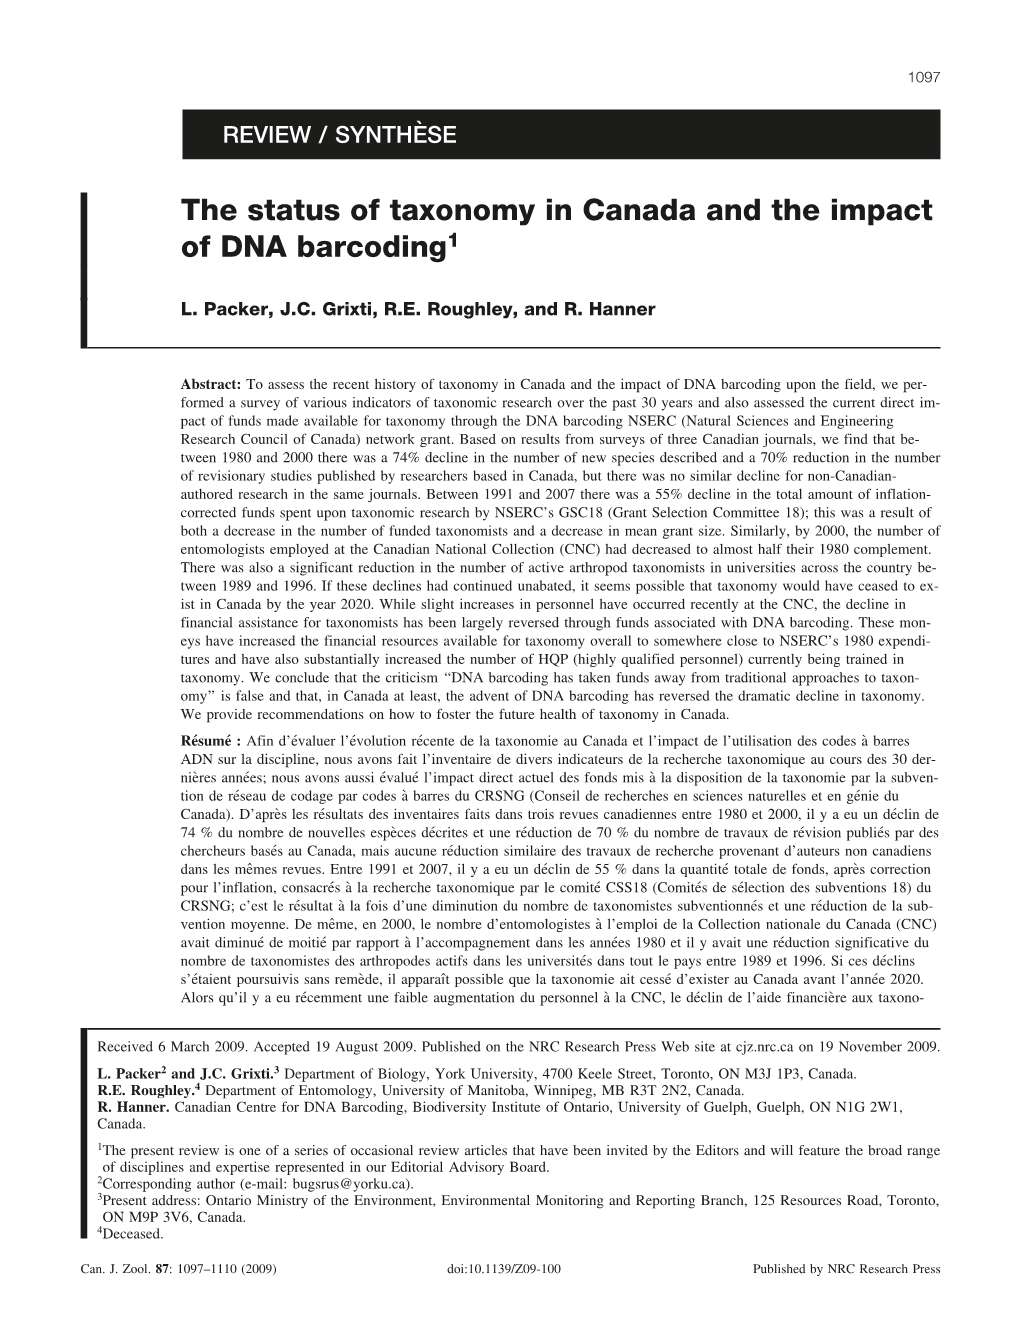 The Status of Taxonomy in Canada and the Impact of DNA Barcoding1